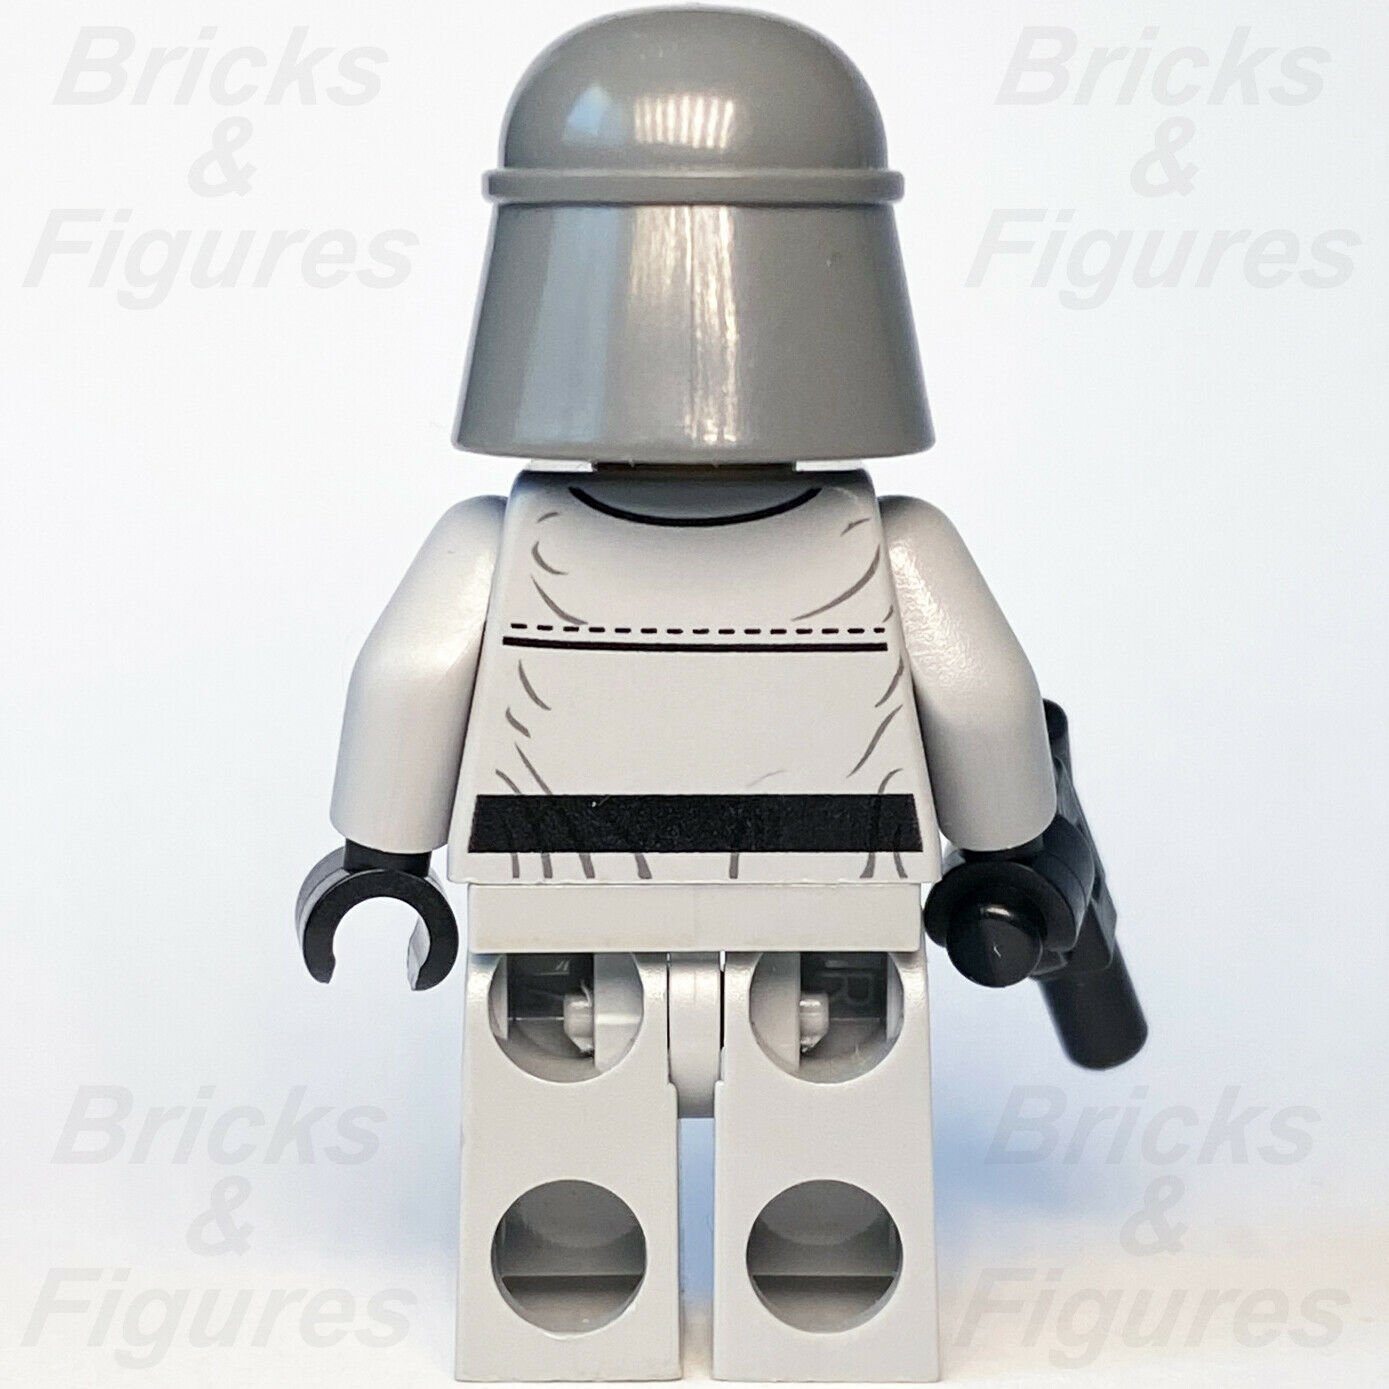 New Star Wars LEGO Imperial AT-ST Driver Return of the Jedi Minifigure 9679 - Bricks & Figures